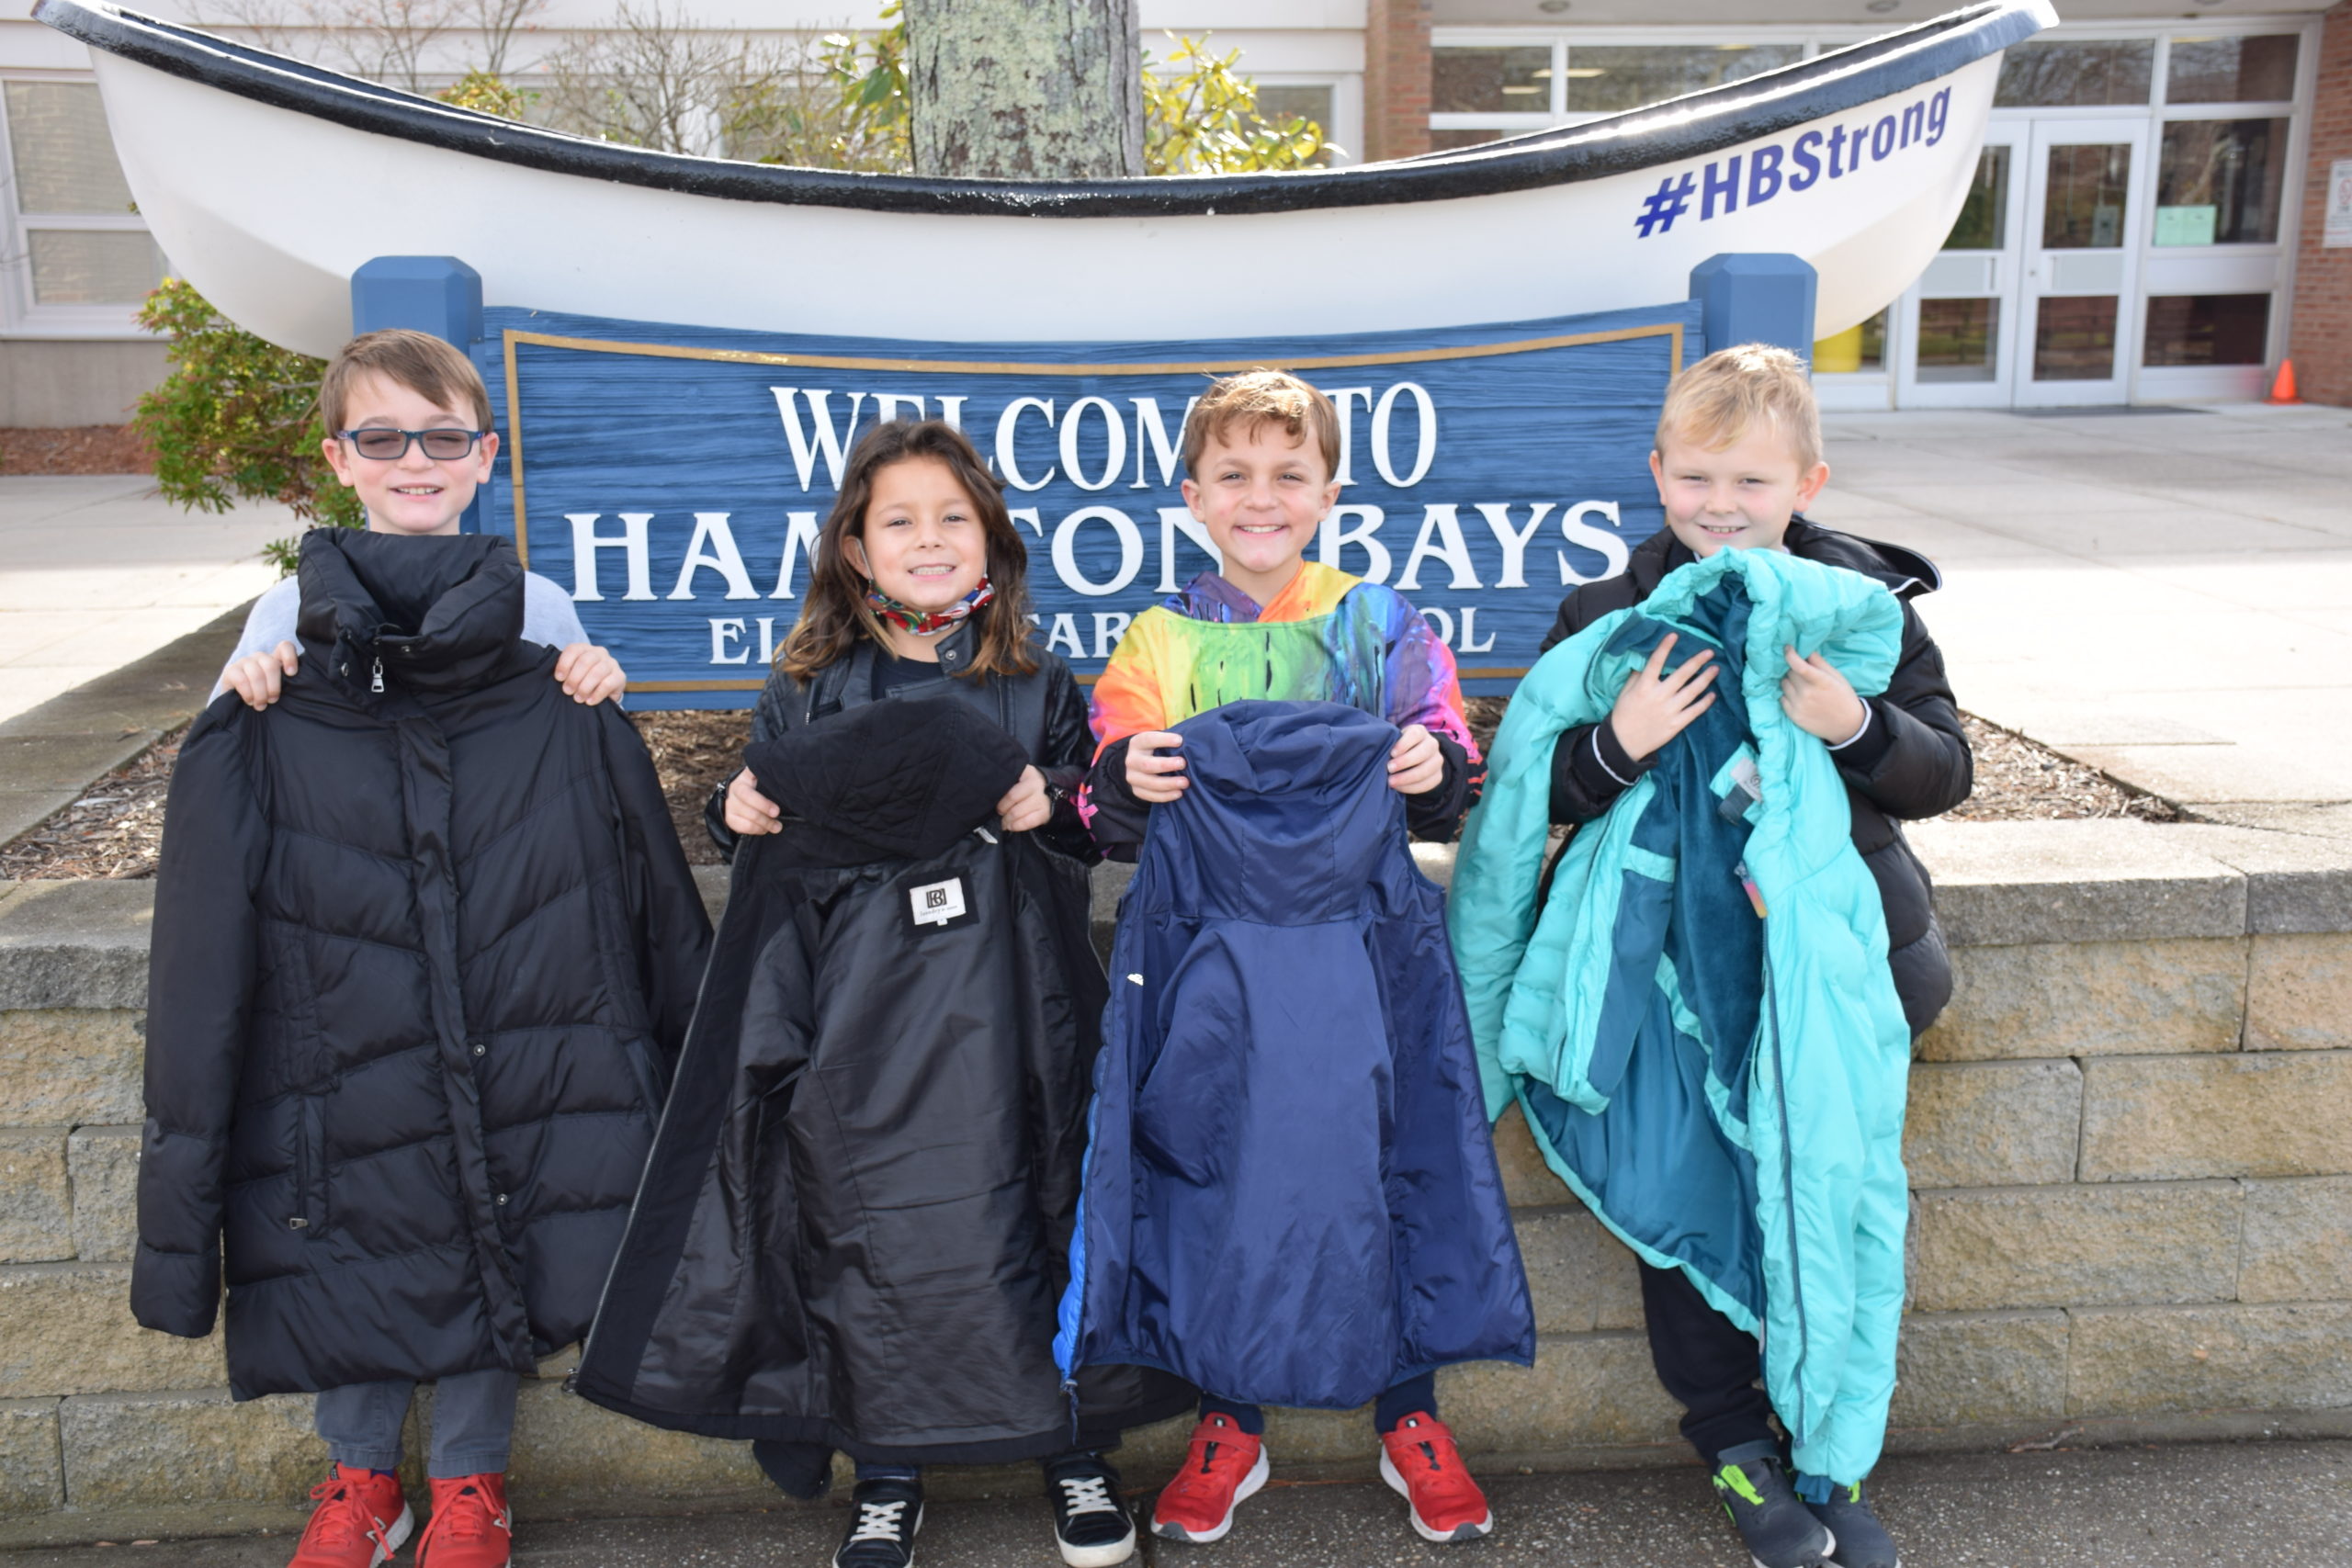 Members of the Hampton Bays Elementary School K-Kids community service club are holding a coat drive for local families in need. The coat drive is one of the many fundraisers the K-Kids have hosted this school year. In November, they collected food to donate to local families for Thanksgiving, and in October, they raised $500 for the American Cancer Society.